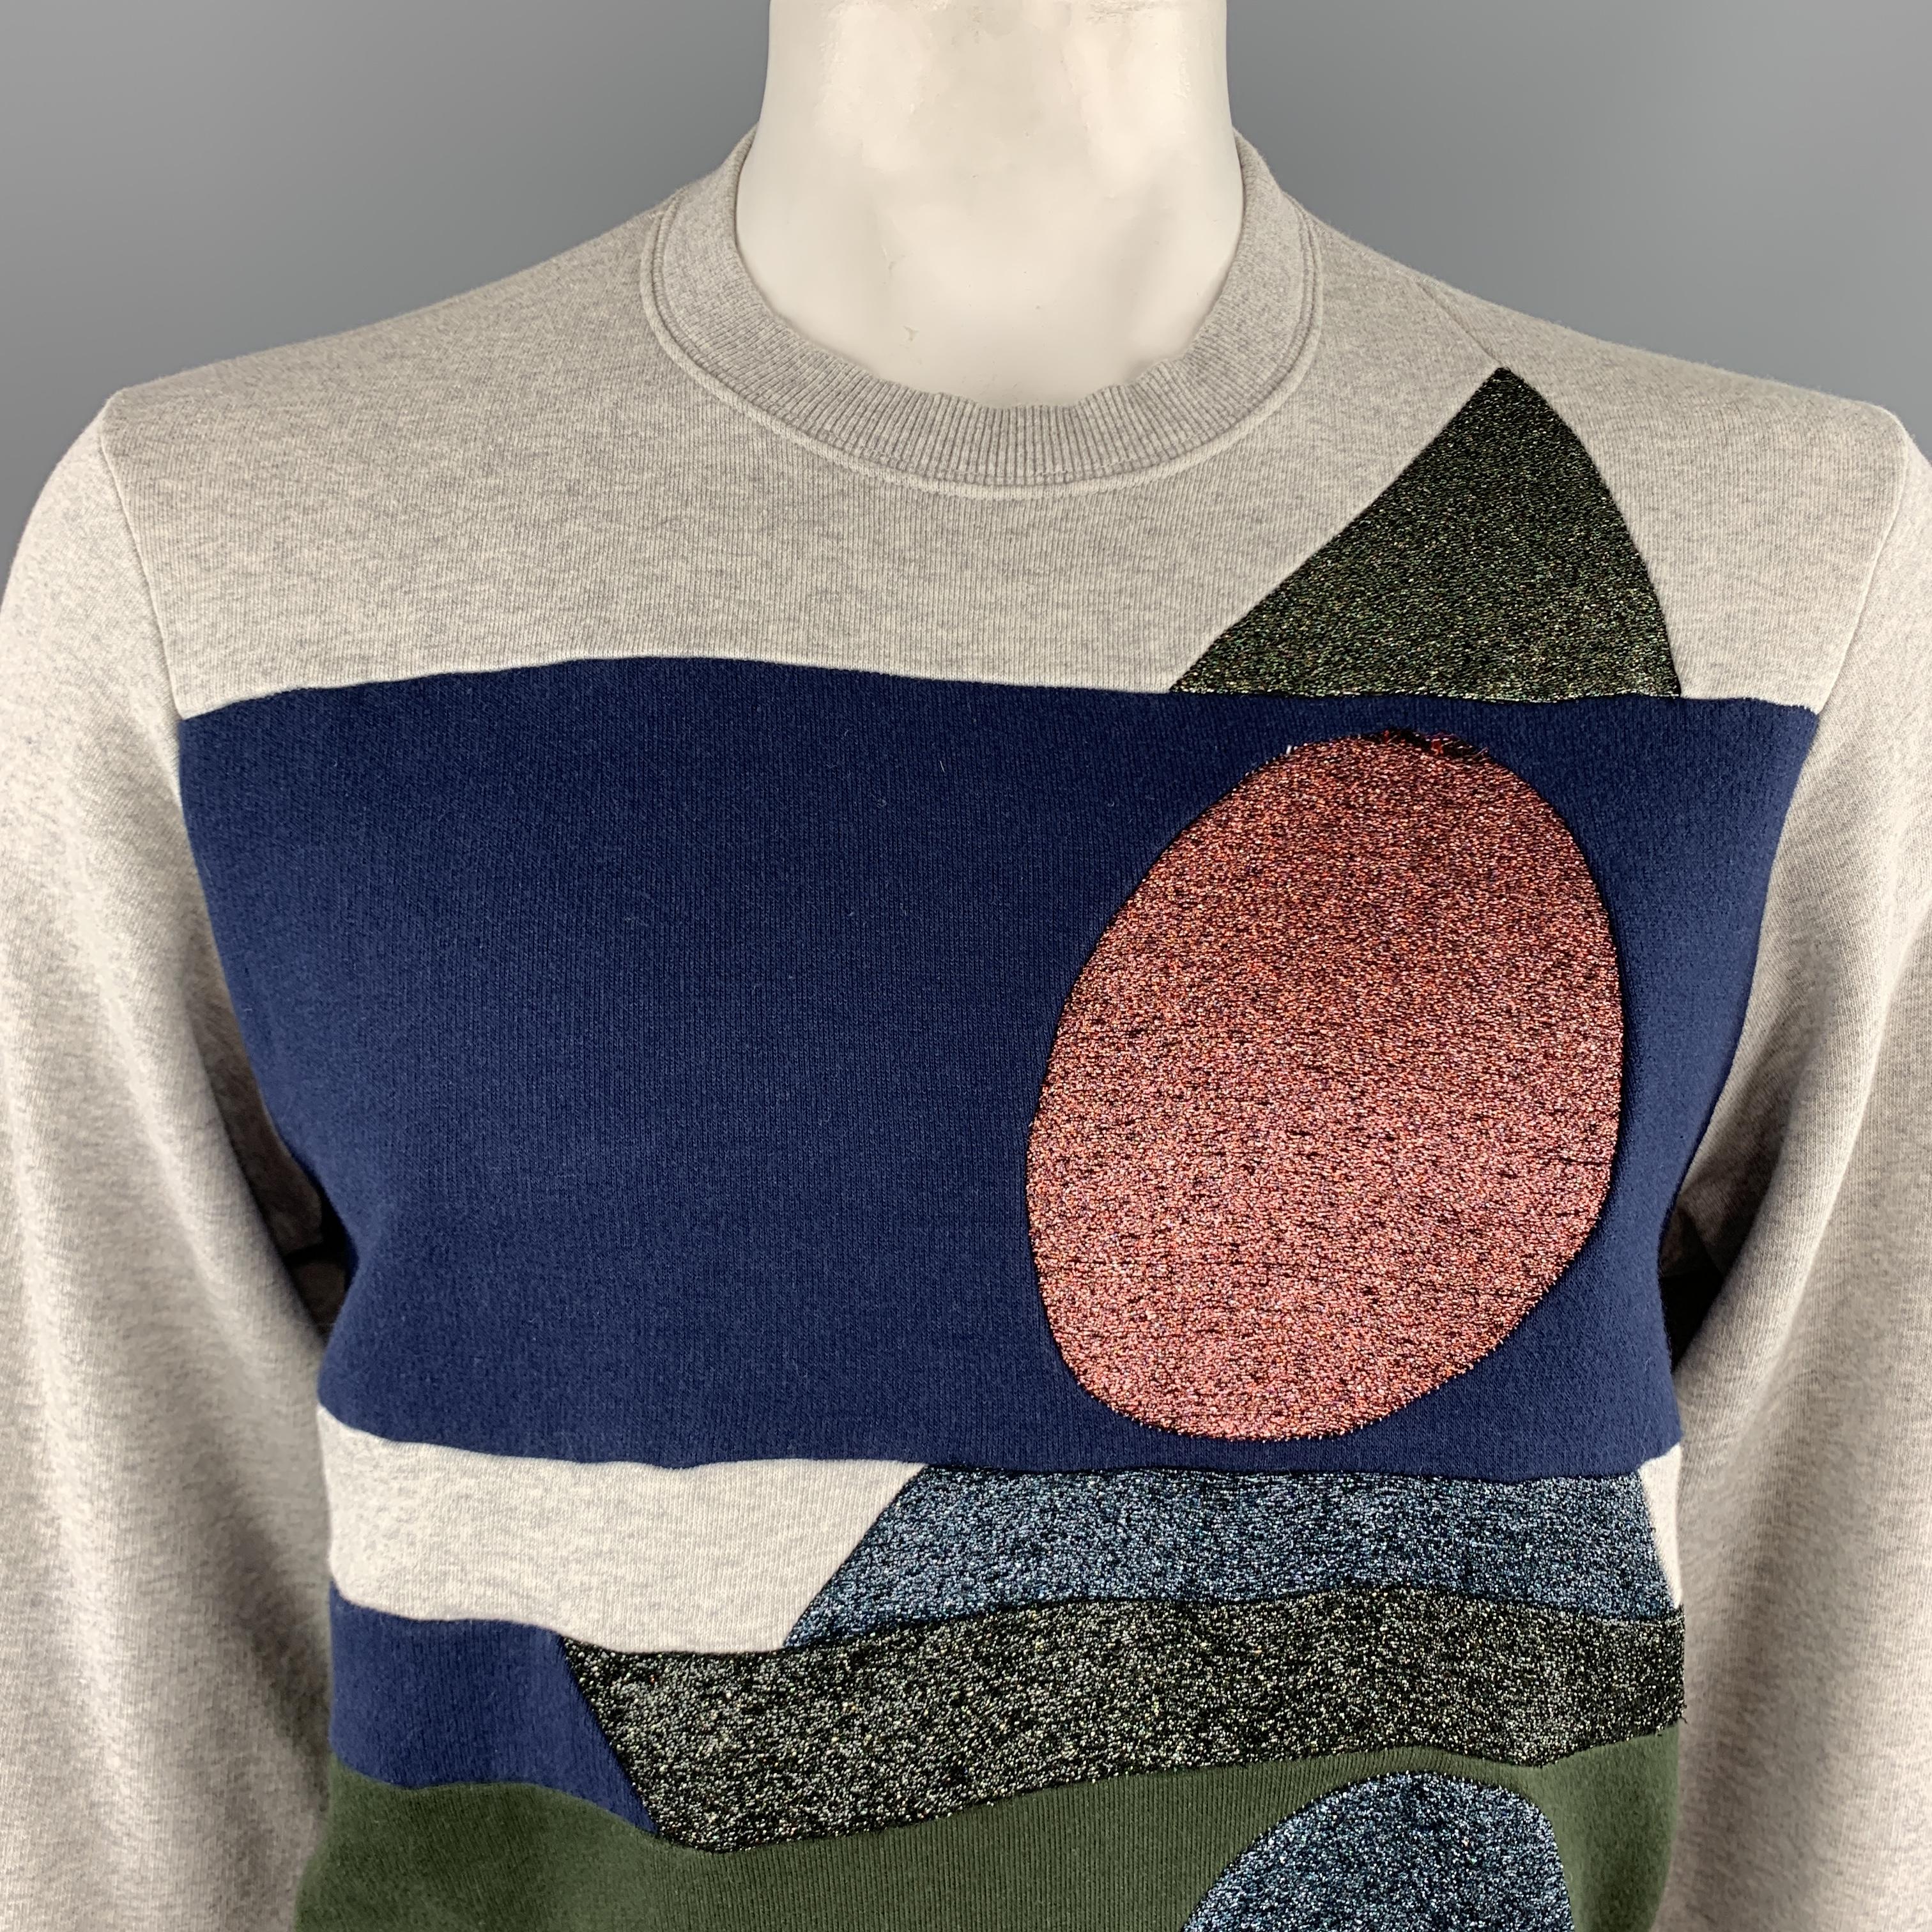 WALTER VAN BEIRENDONCK pullover sweatshirt comes in light heather gray jersey with navy and olive green color block patchwork stripes and sparkle knit geometric shapes panels. Wear throughout. As-is. Made in Italy.

Good Pre-Owned Condition.
Marked: